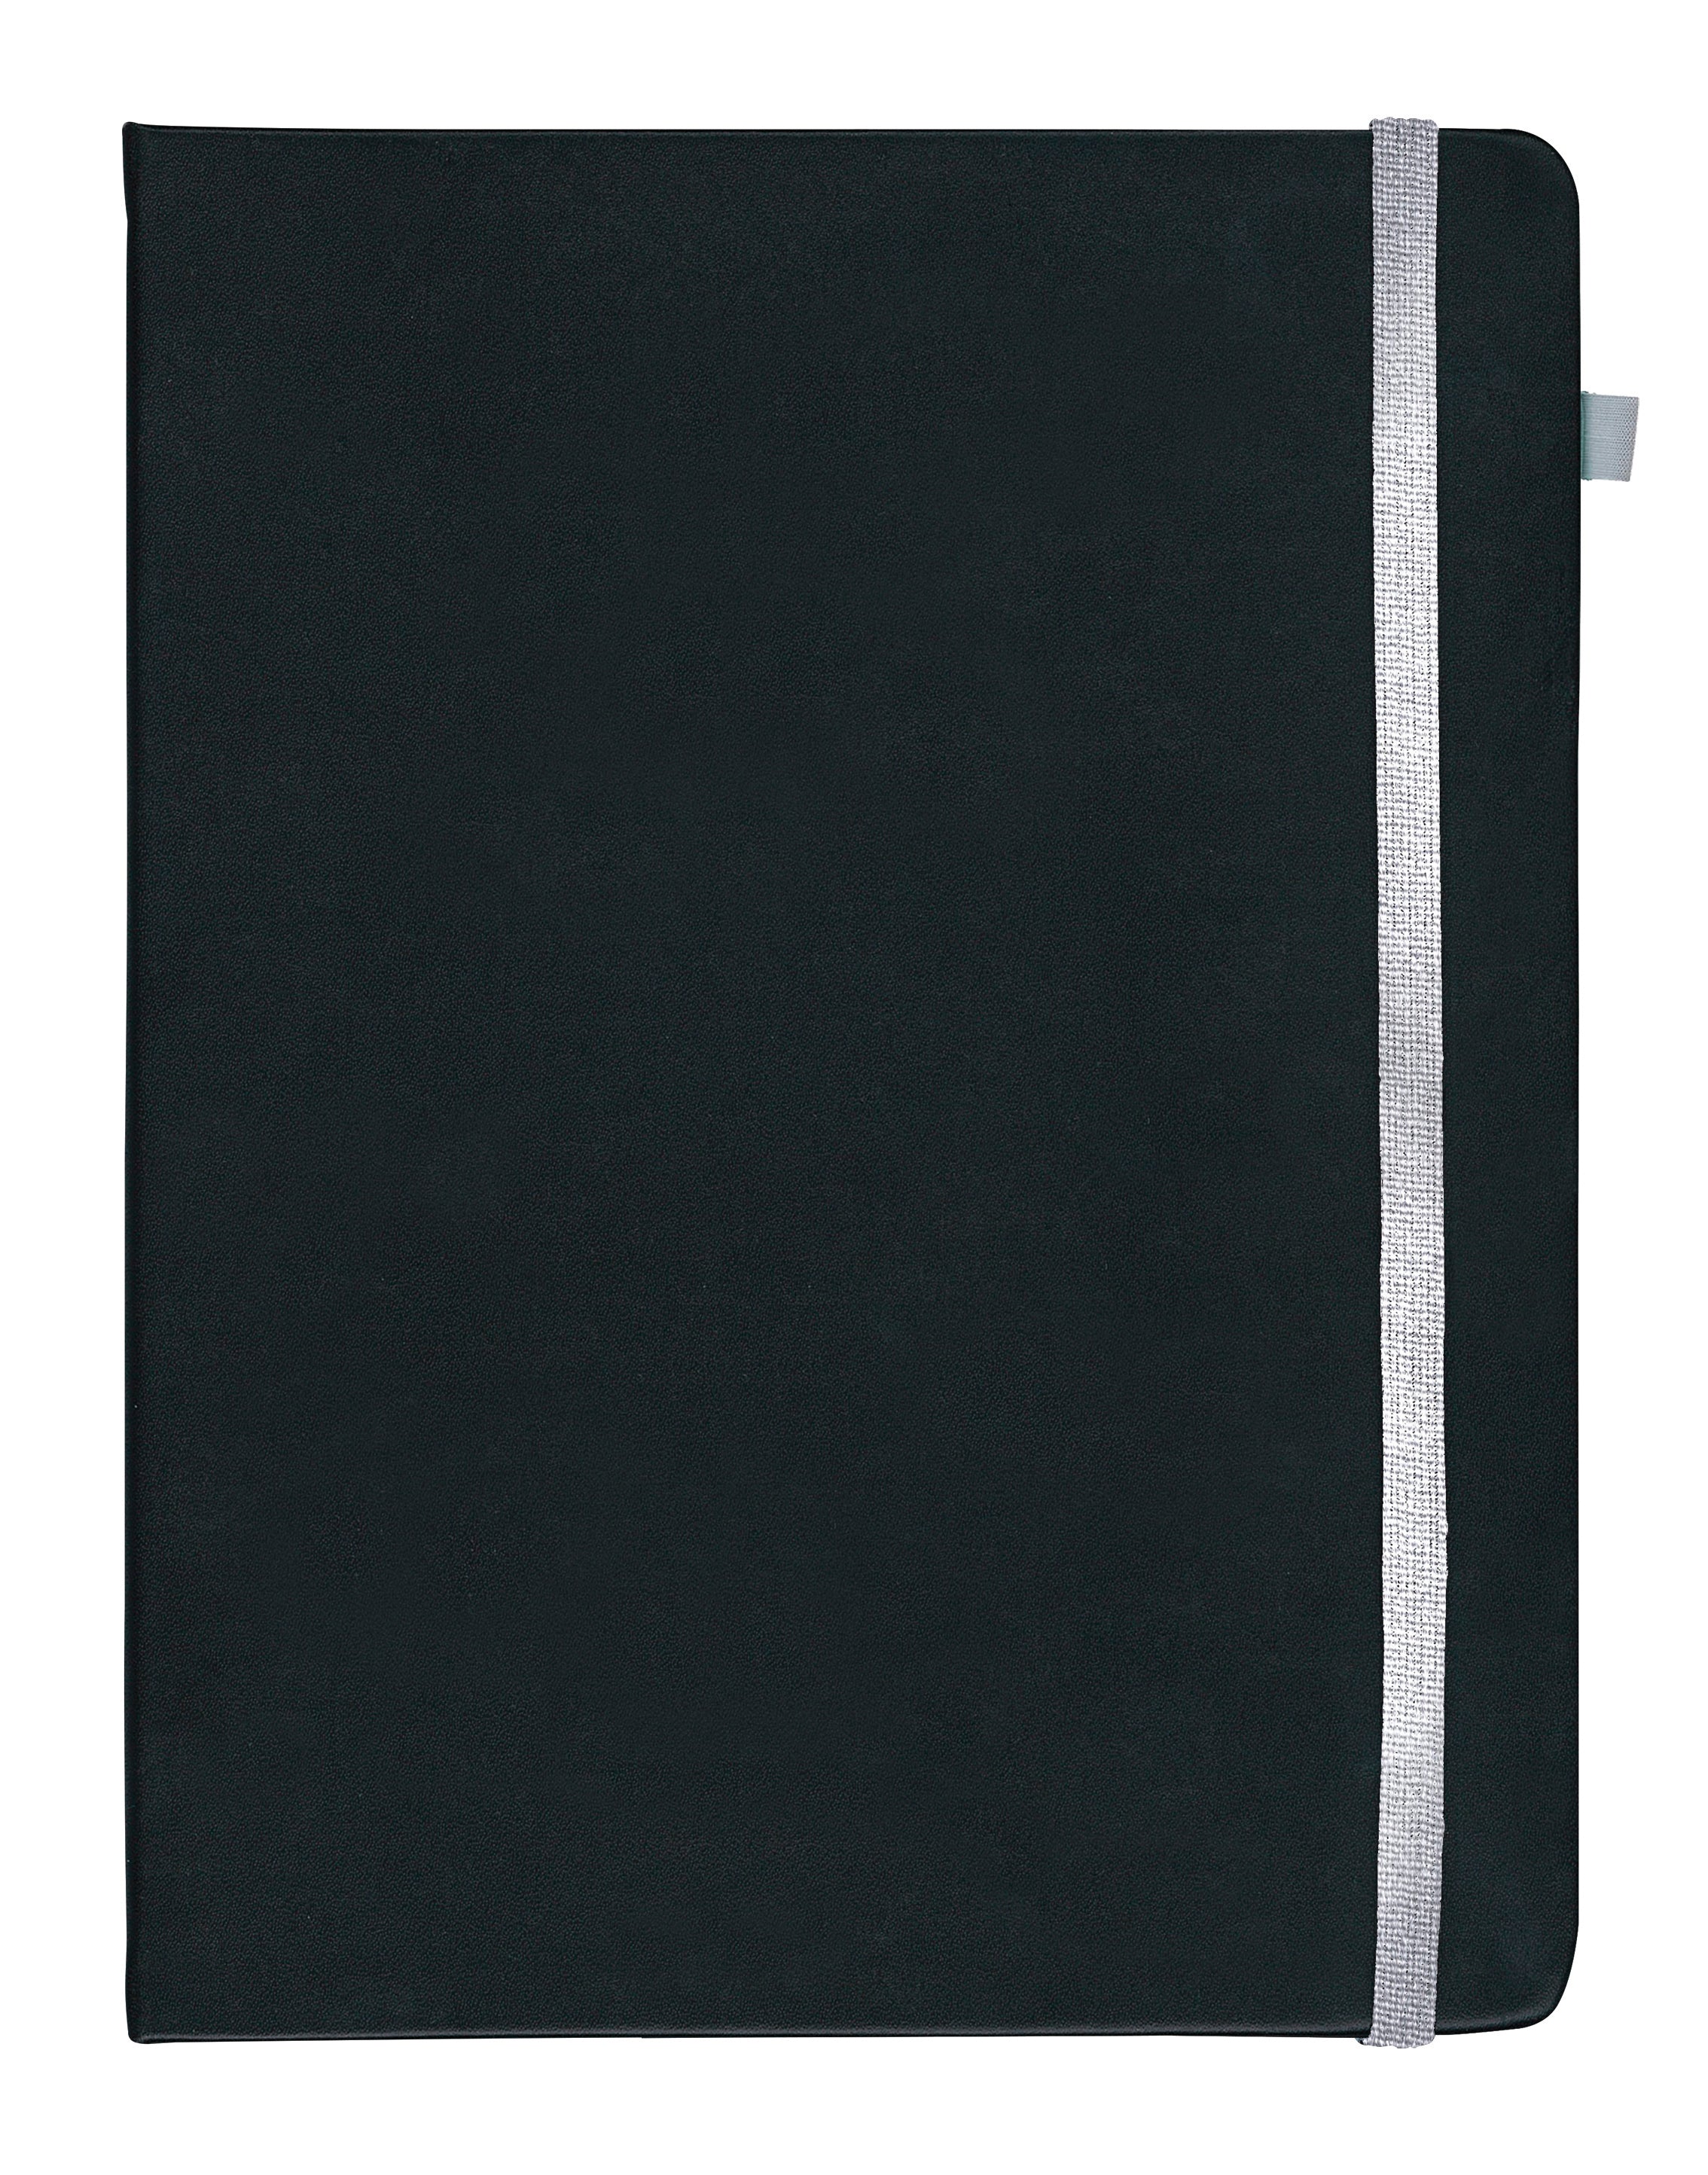 Vauxhall Contrast Notebook - Quarto Ruled - Collins Debden